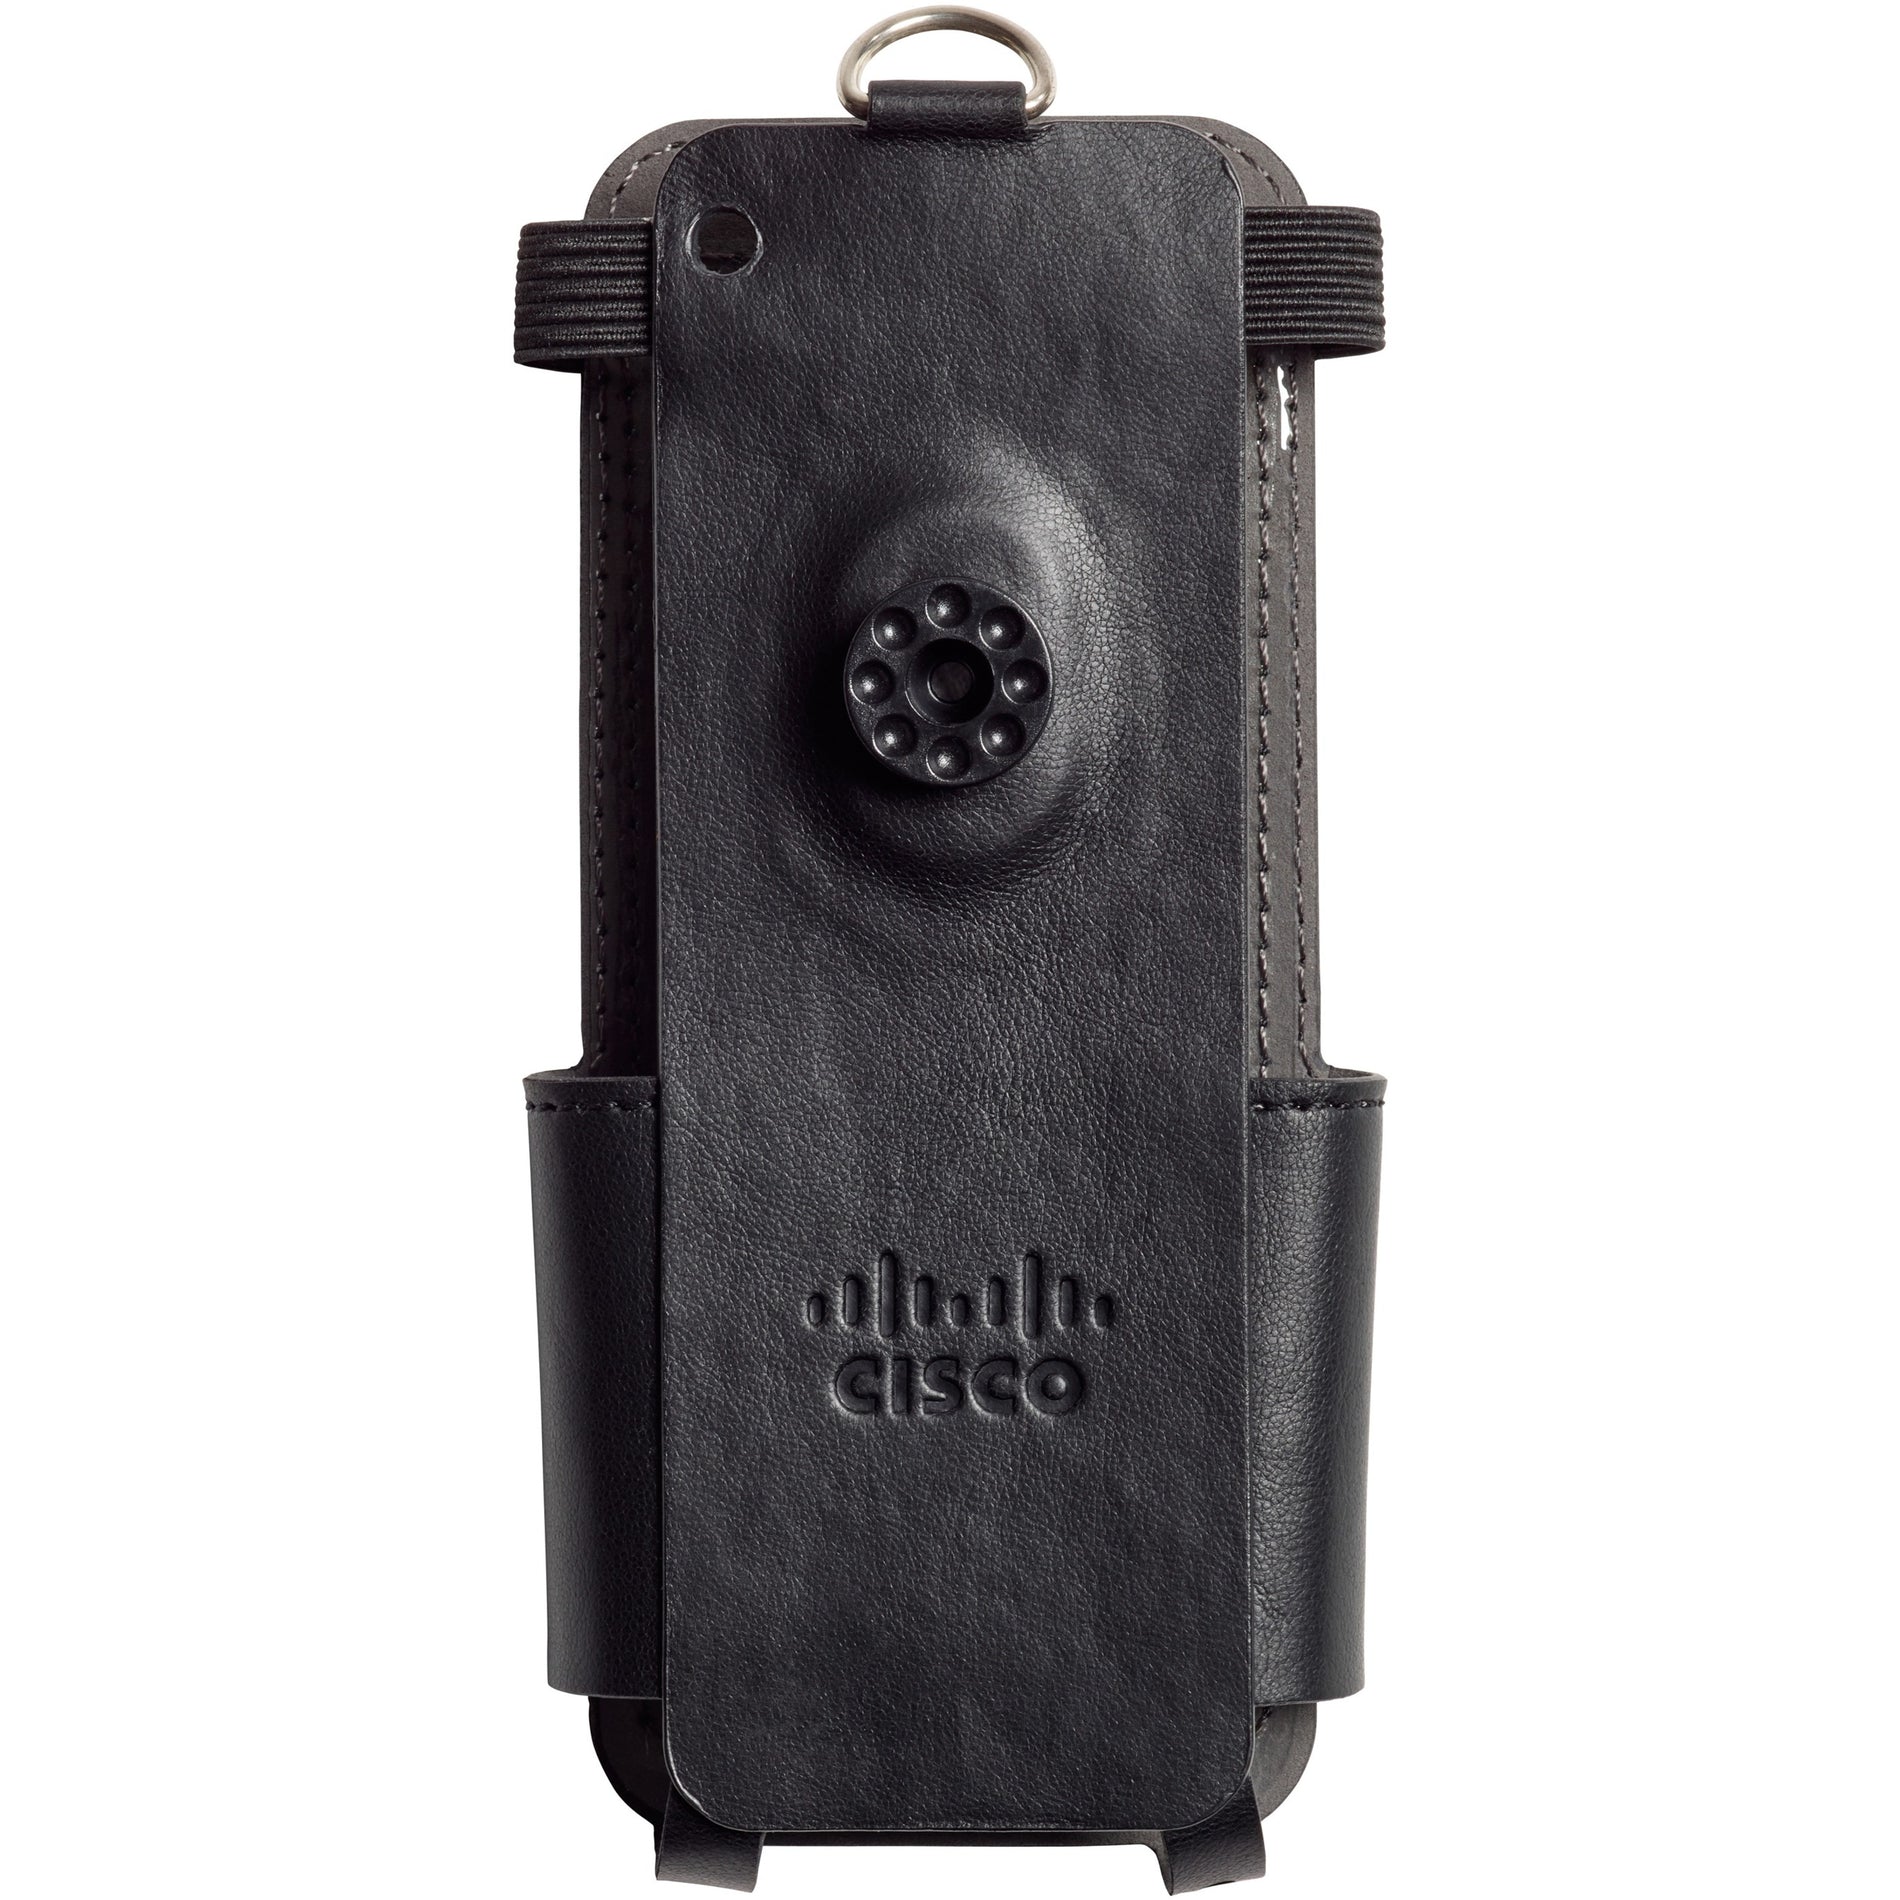 Cisco CP-LCASE-8821= Wireless IP Phone 8821 and 8821-EX Leather Case, with Belt and Pocket Clip